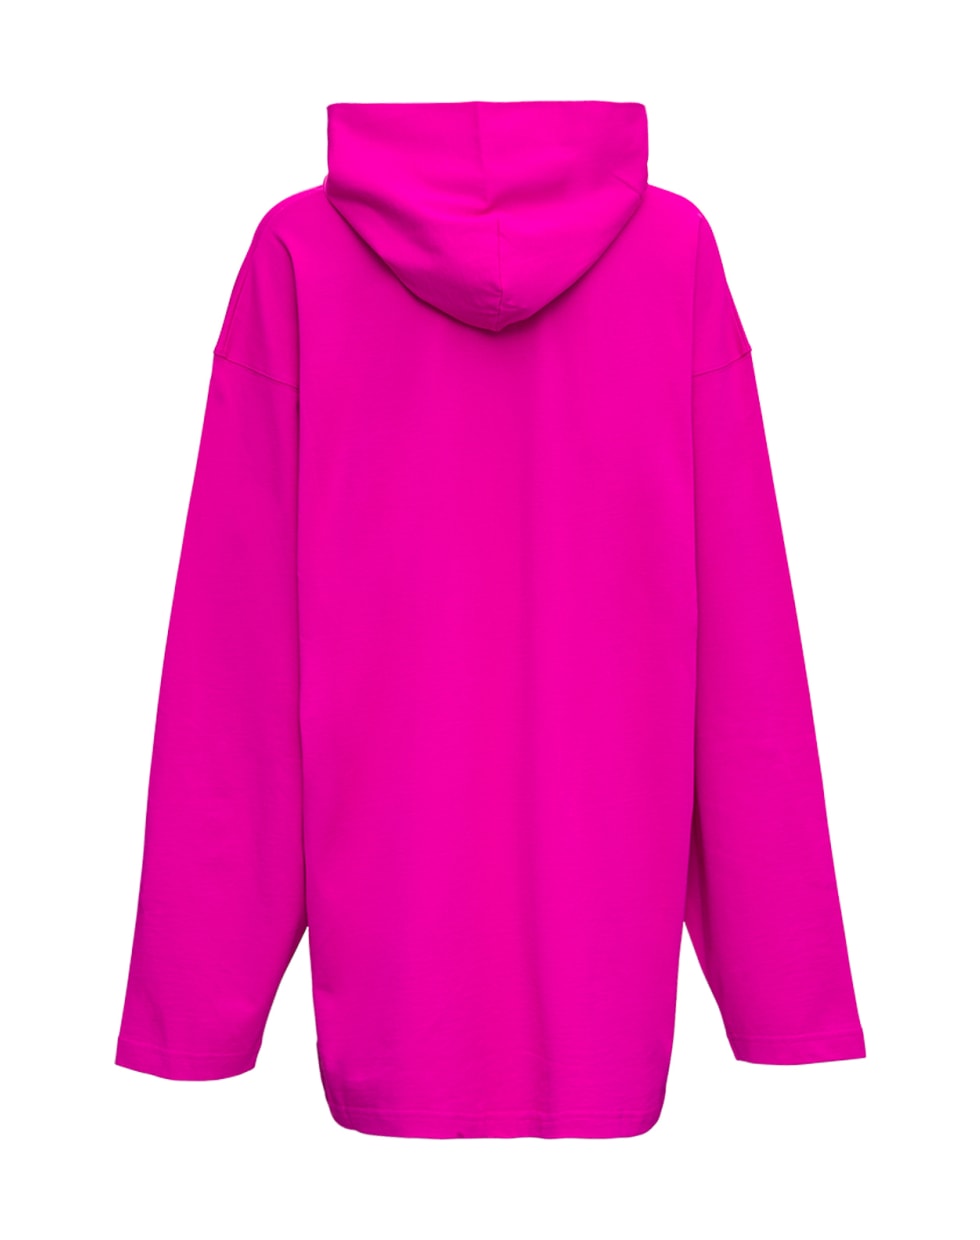 Balenciaga This Is Not Oversaize Hoodie In Pink Jersey - Fuxia